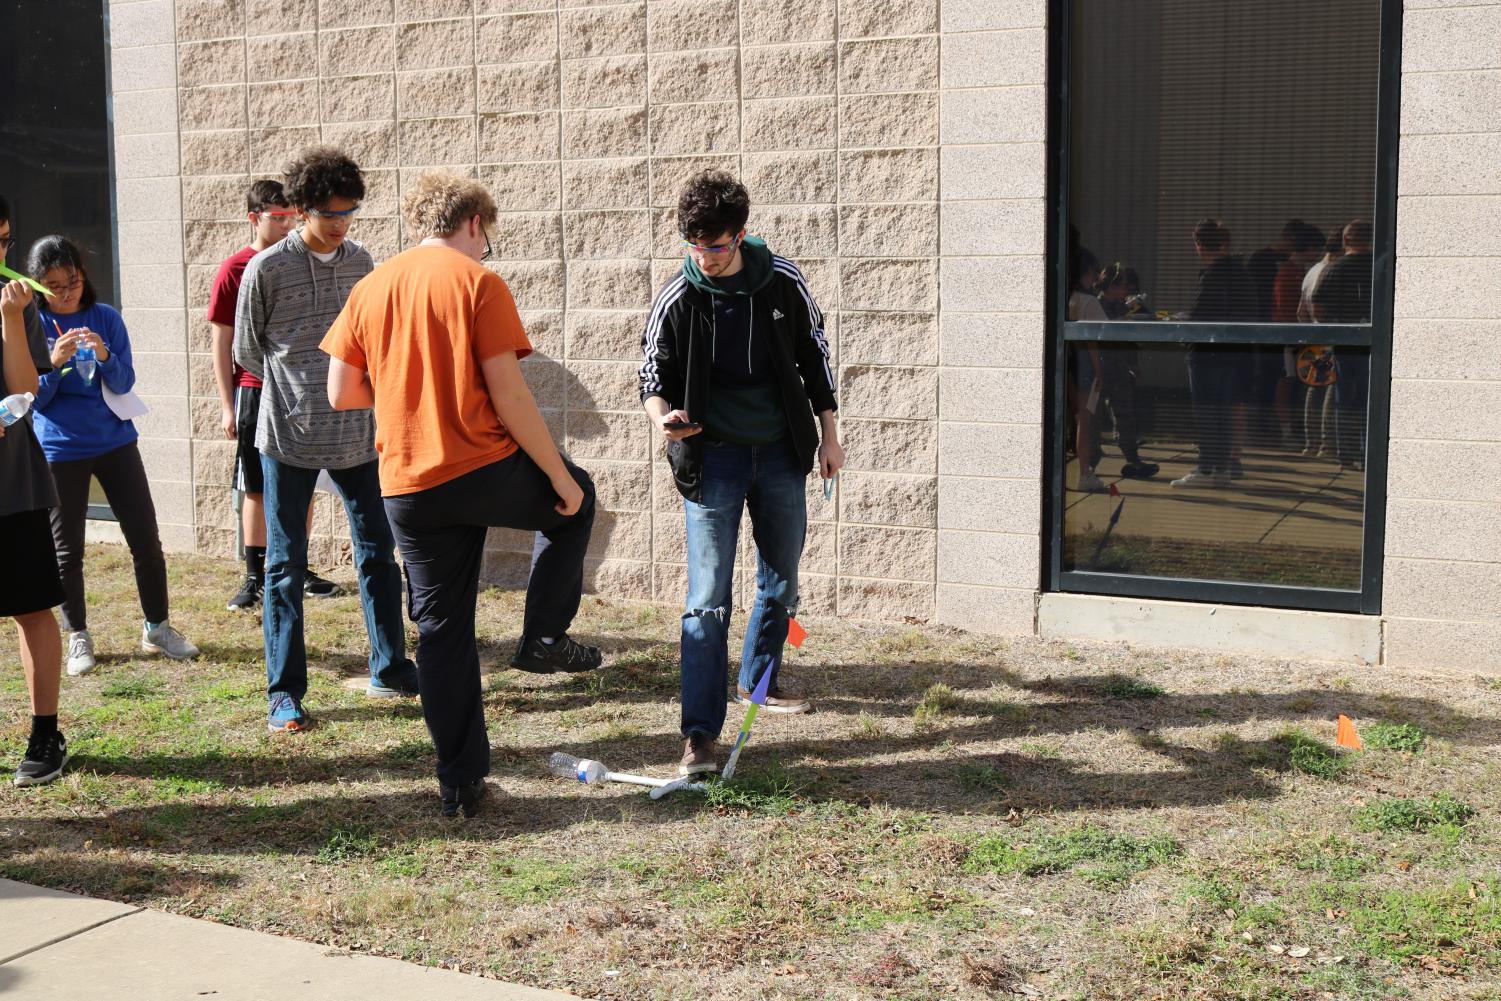 General+Physics+Students+Launch+Into+Projectile+Motion+Unit+with+Paper+Rockets